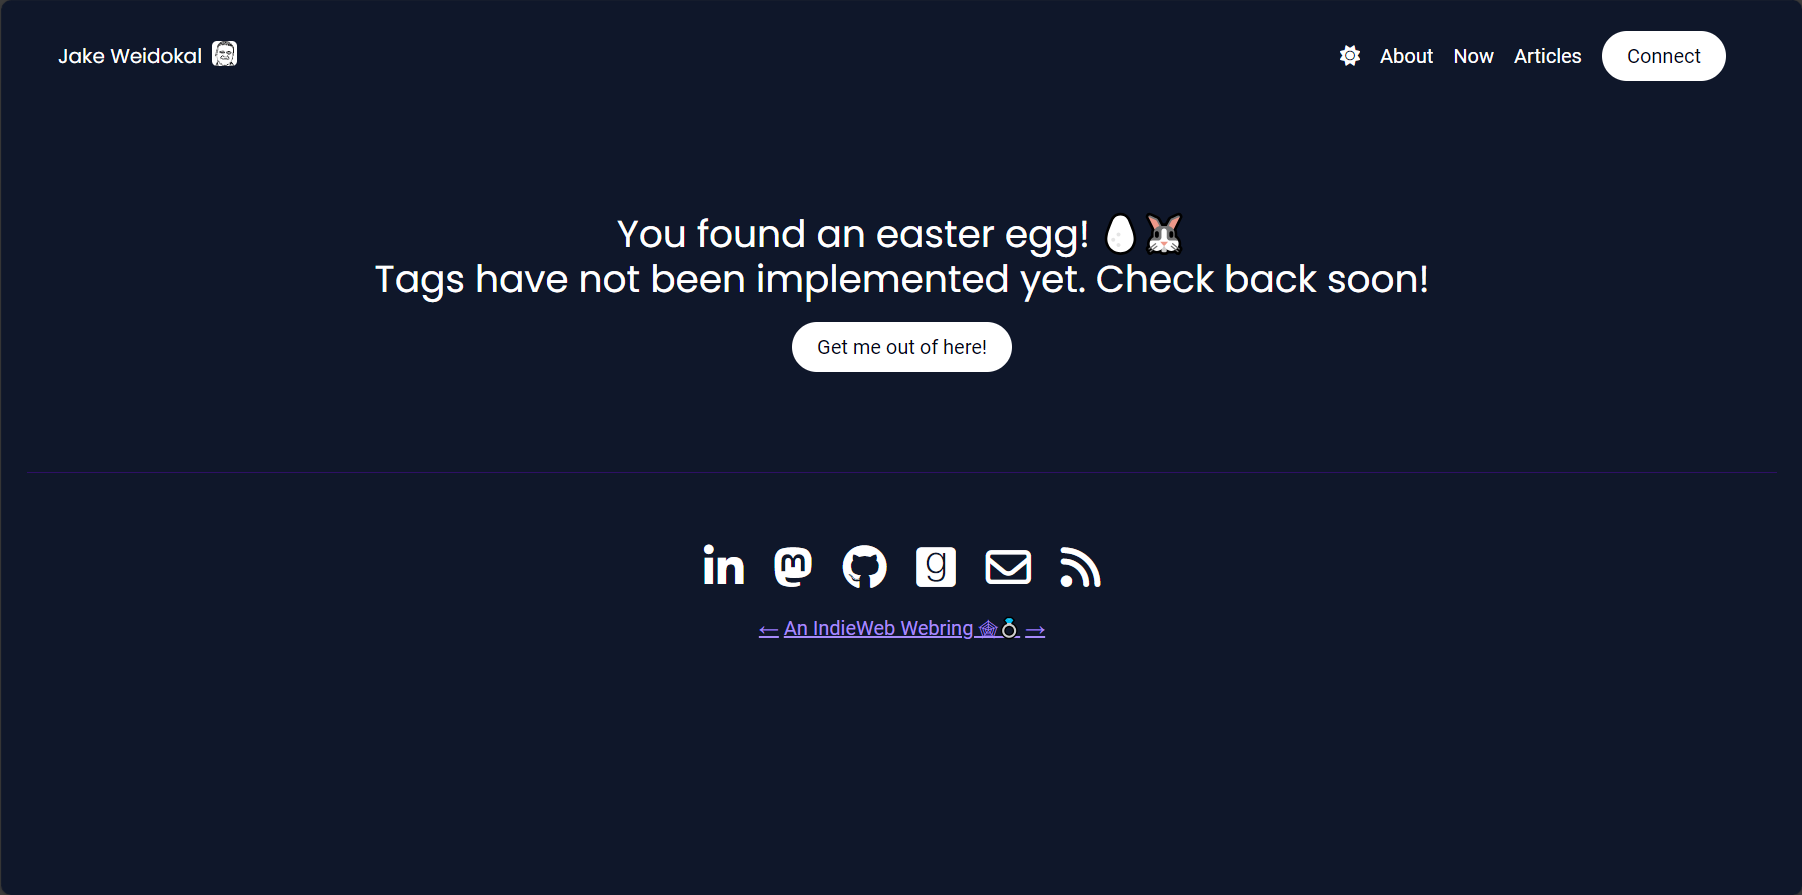 This page shows a not implemented screen, stating 'You found an easter egg! Tags have not been implemented yet. Check back soon!'. At the bottom, there is a button that says Get me out of Here!